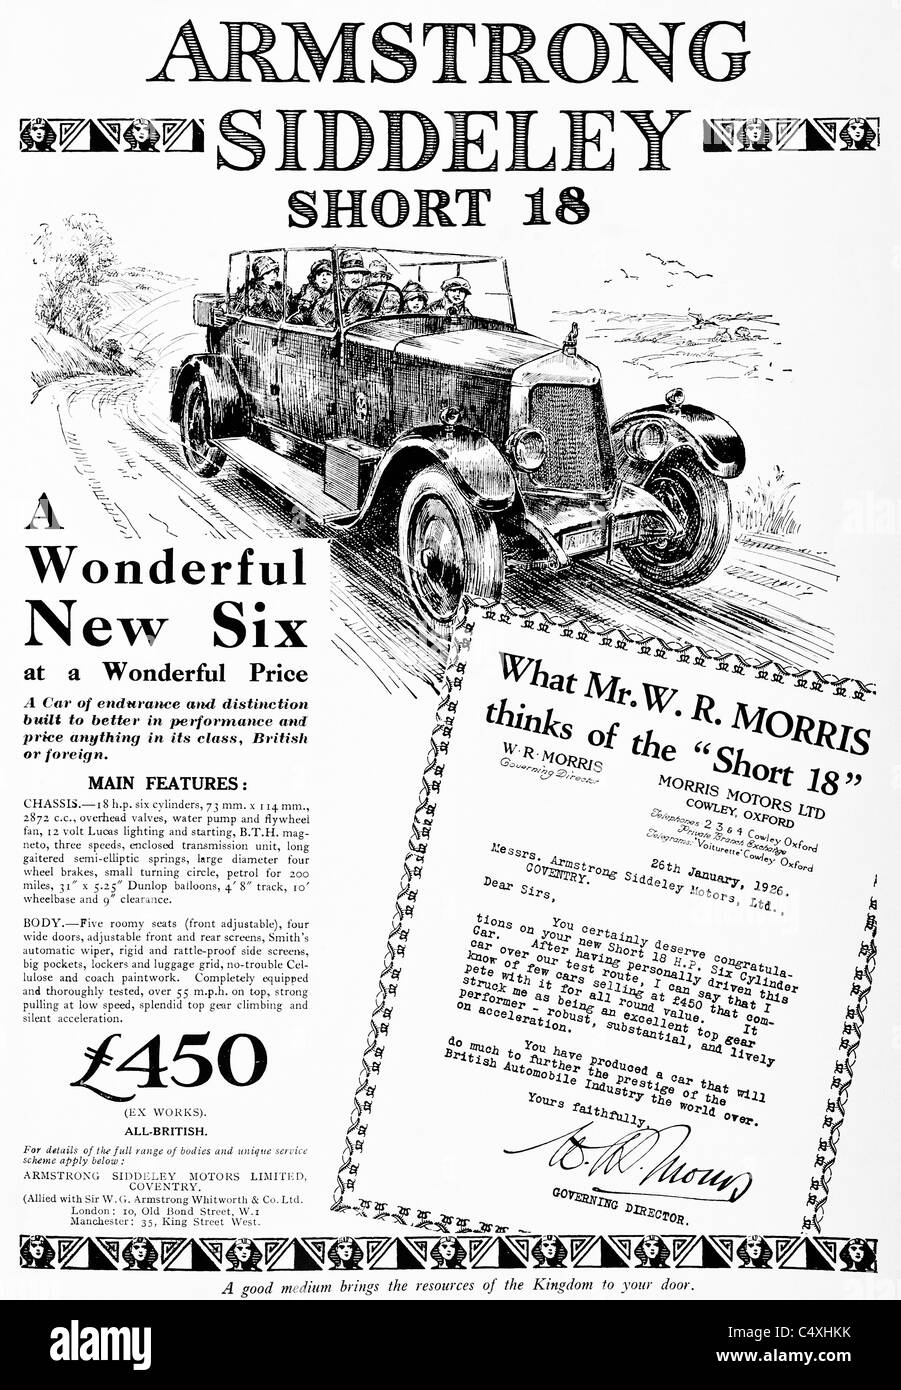 1926 'Armstrong Siddeley Short 18' Car Advertisement from 'Homes and Gardens' magazine. Stock Photo